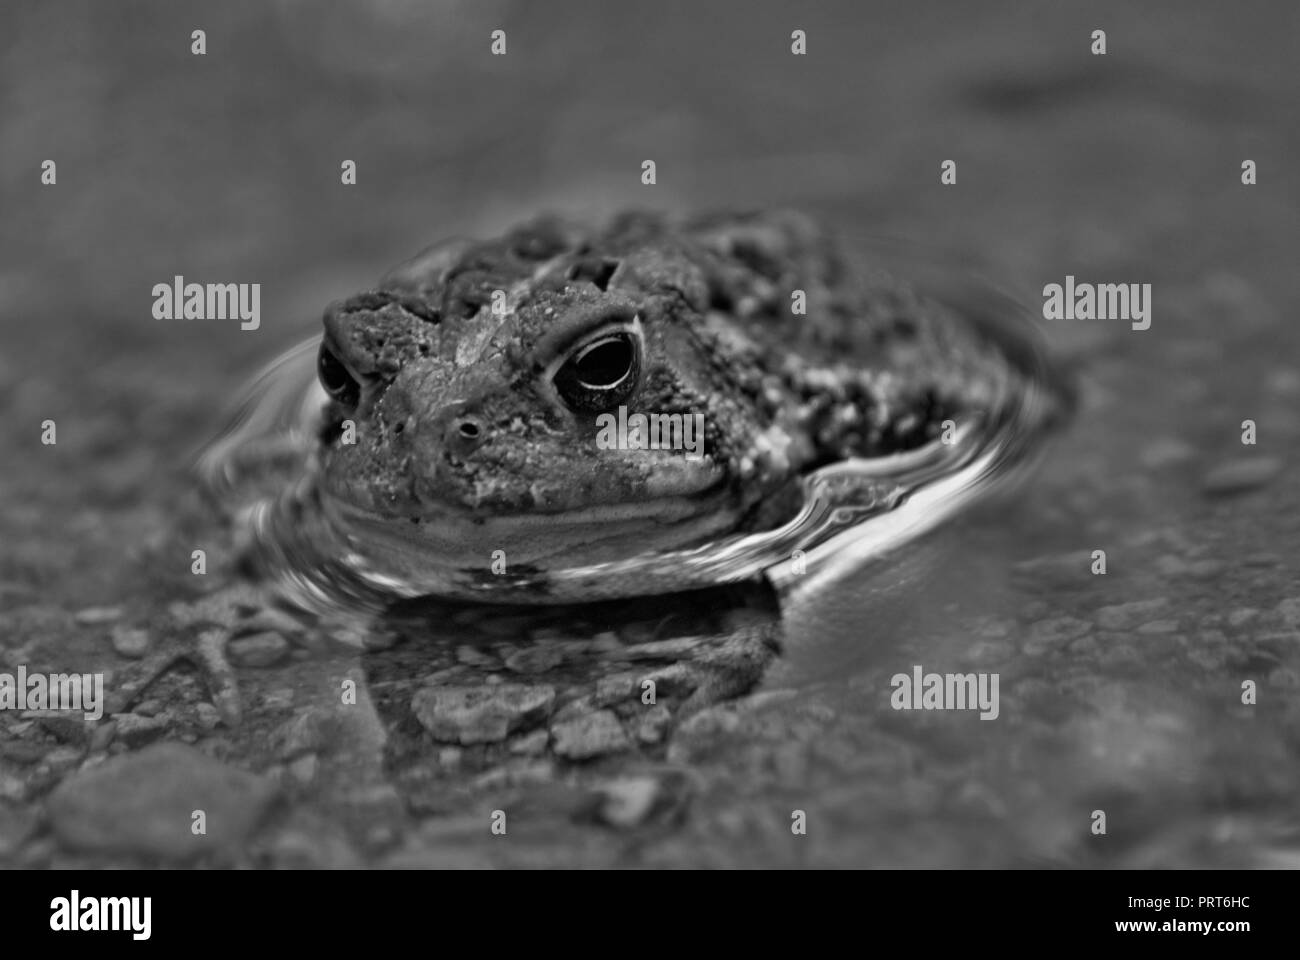 Close up view of a frog in the water Stock Photo